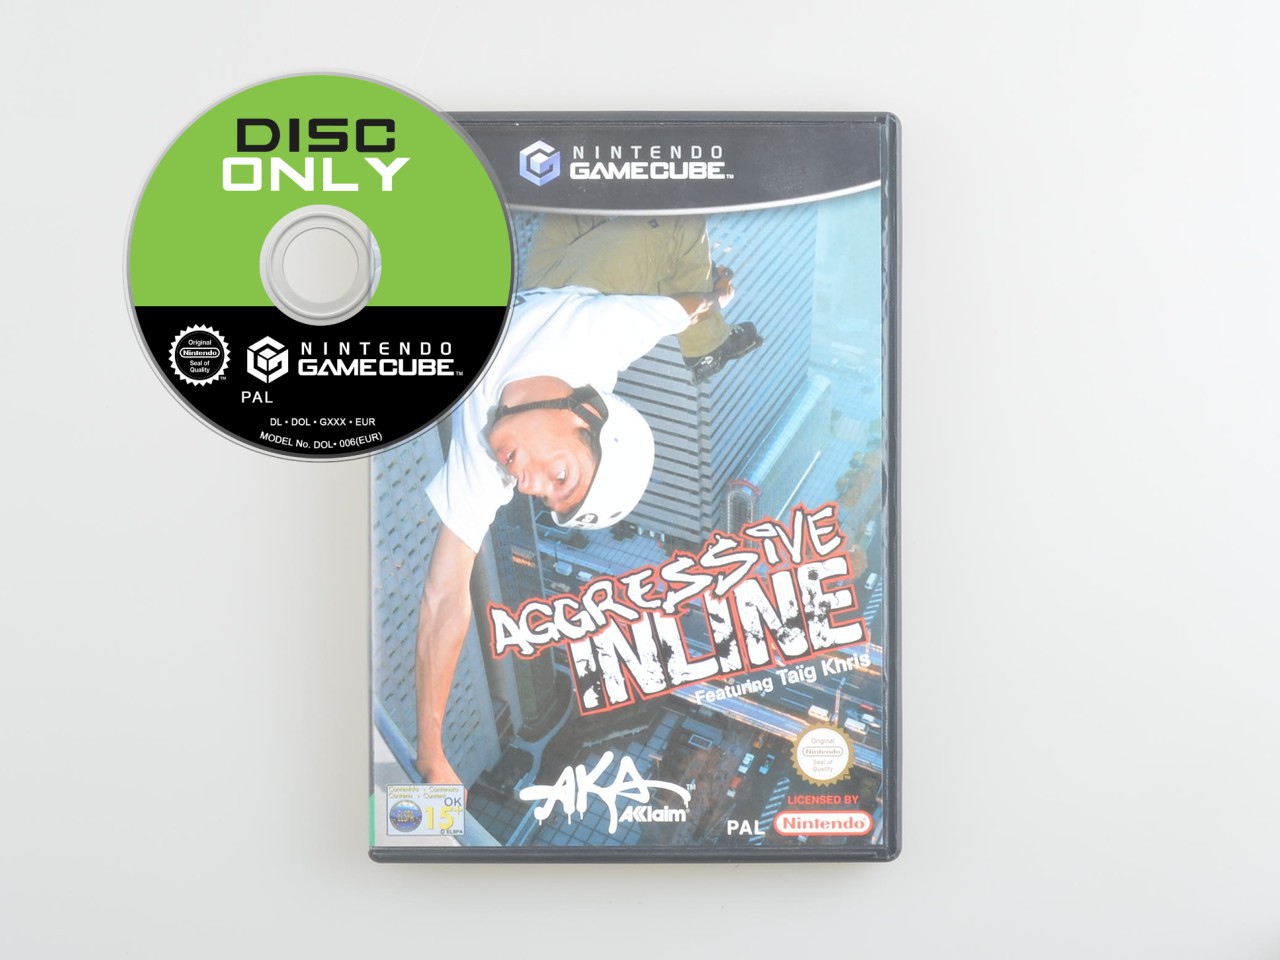 Aggressive Inline Featuring Taïg Khris - Disc Only Kopen | Gamecube Games